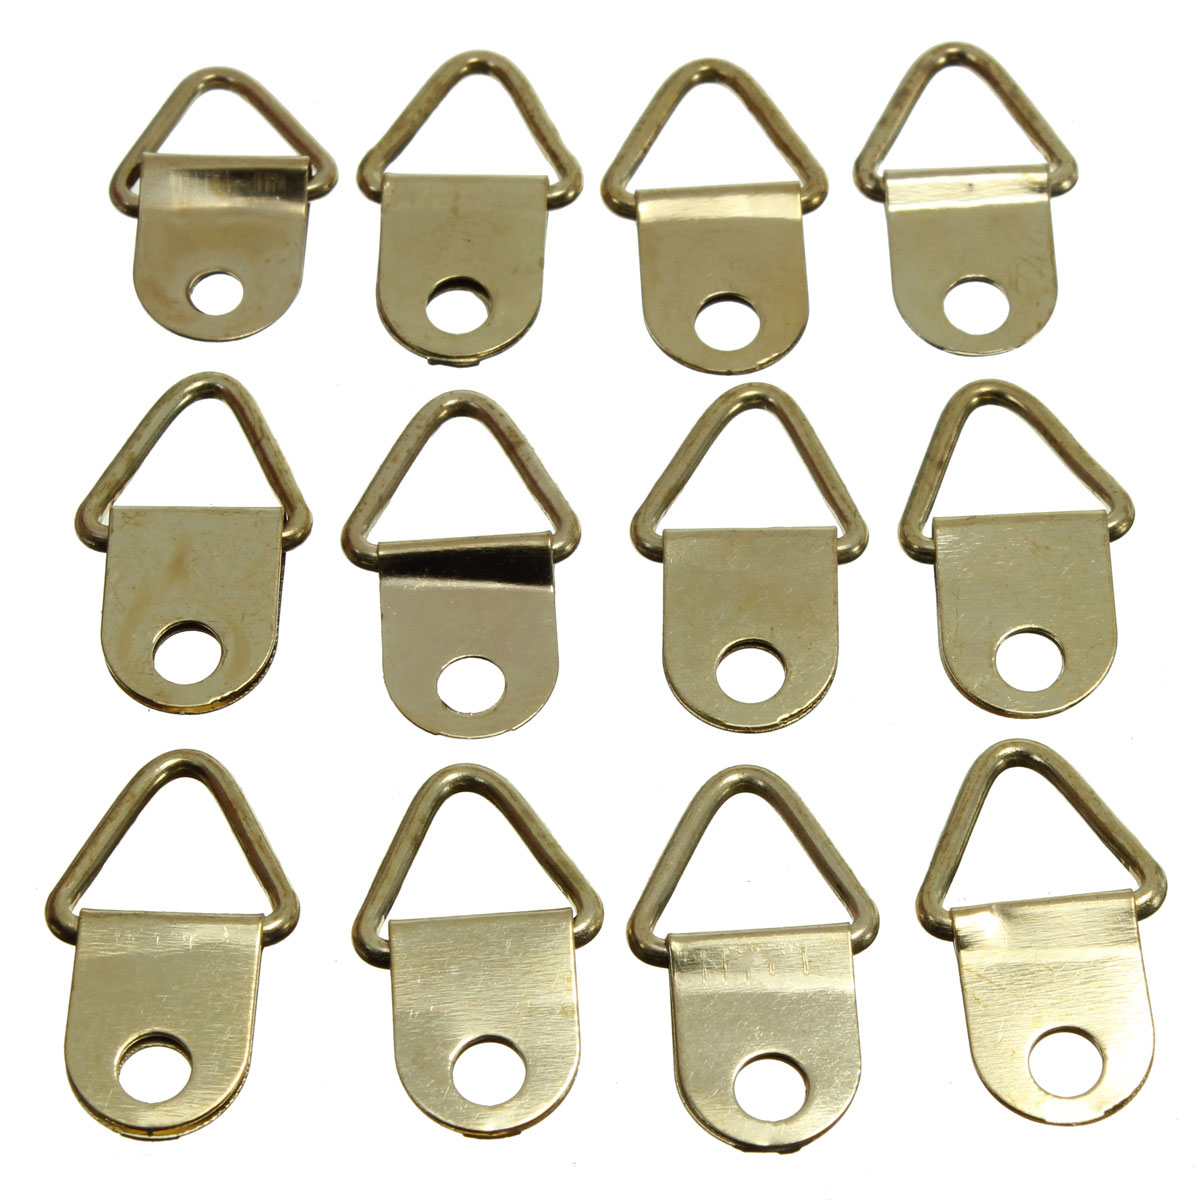 50Pcs-Copper-Triangle-Photo-Picture-Frame-Wall-Mount-Hook-Hanger-Ring-1033984-8